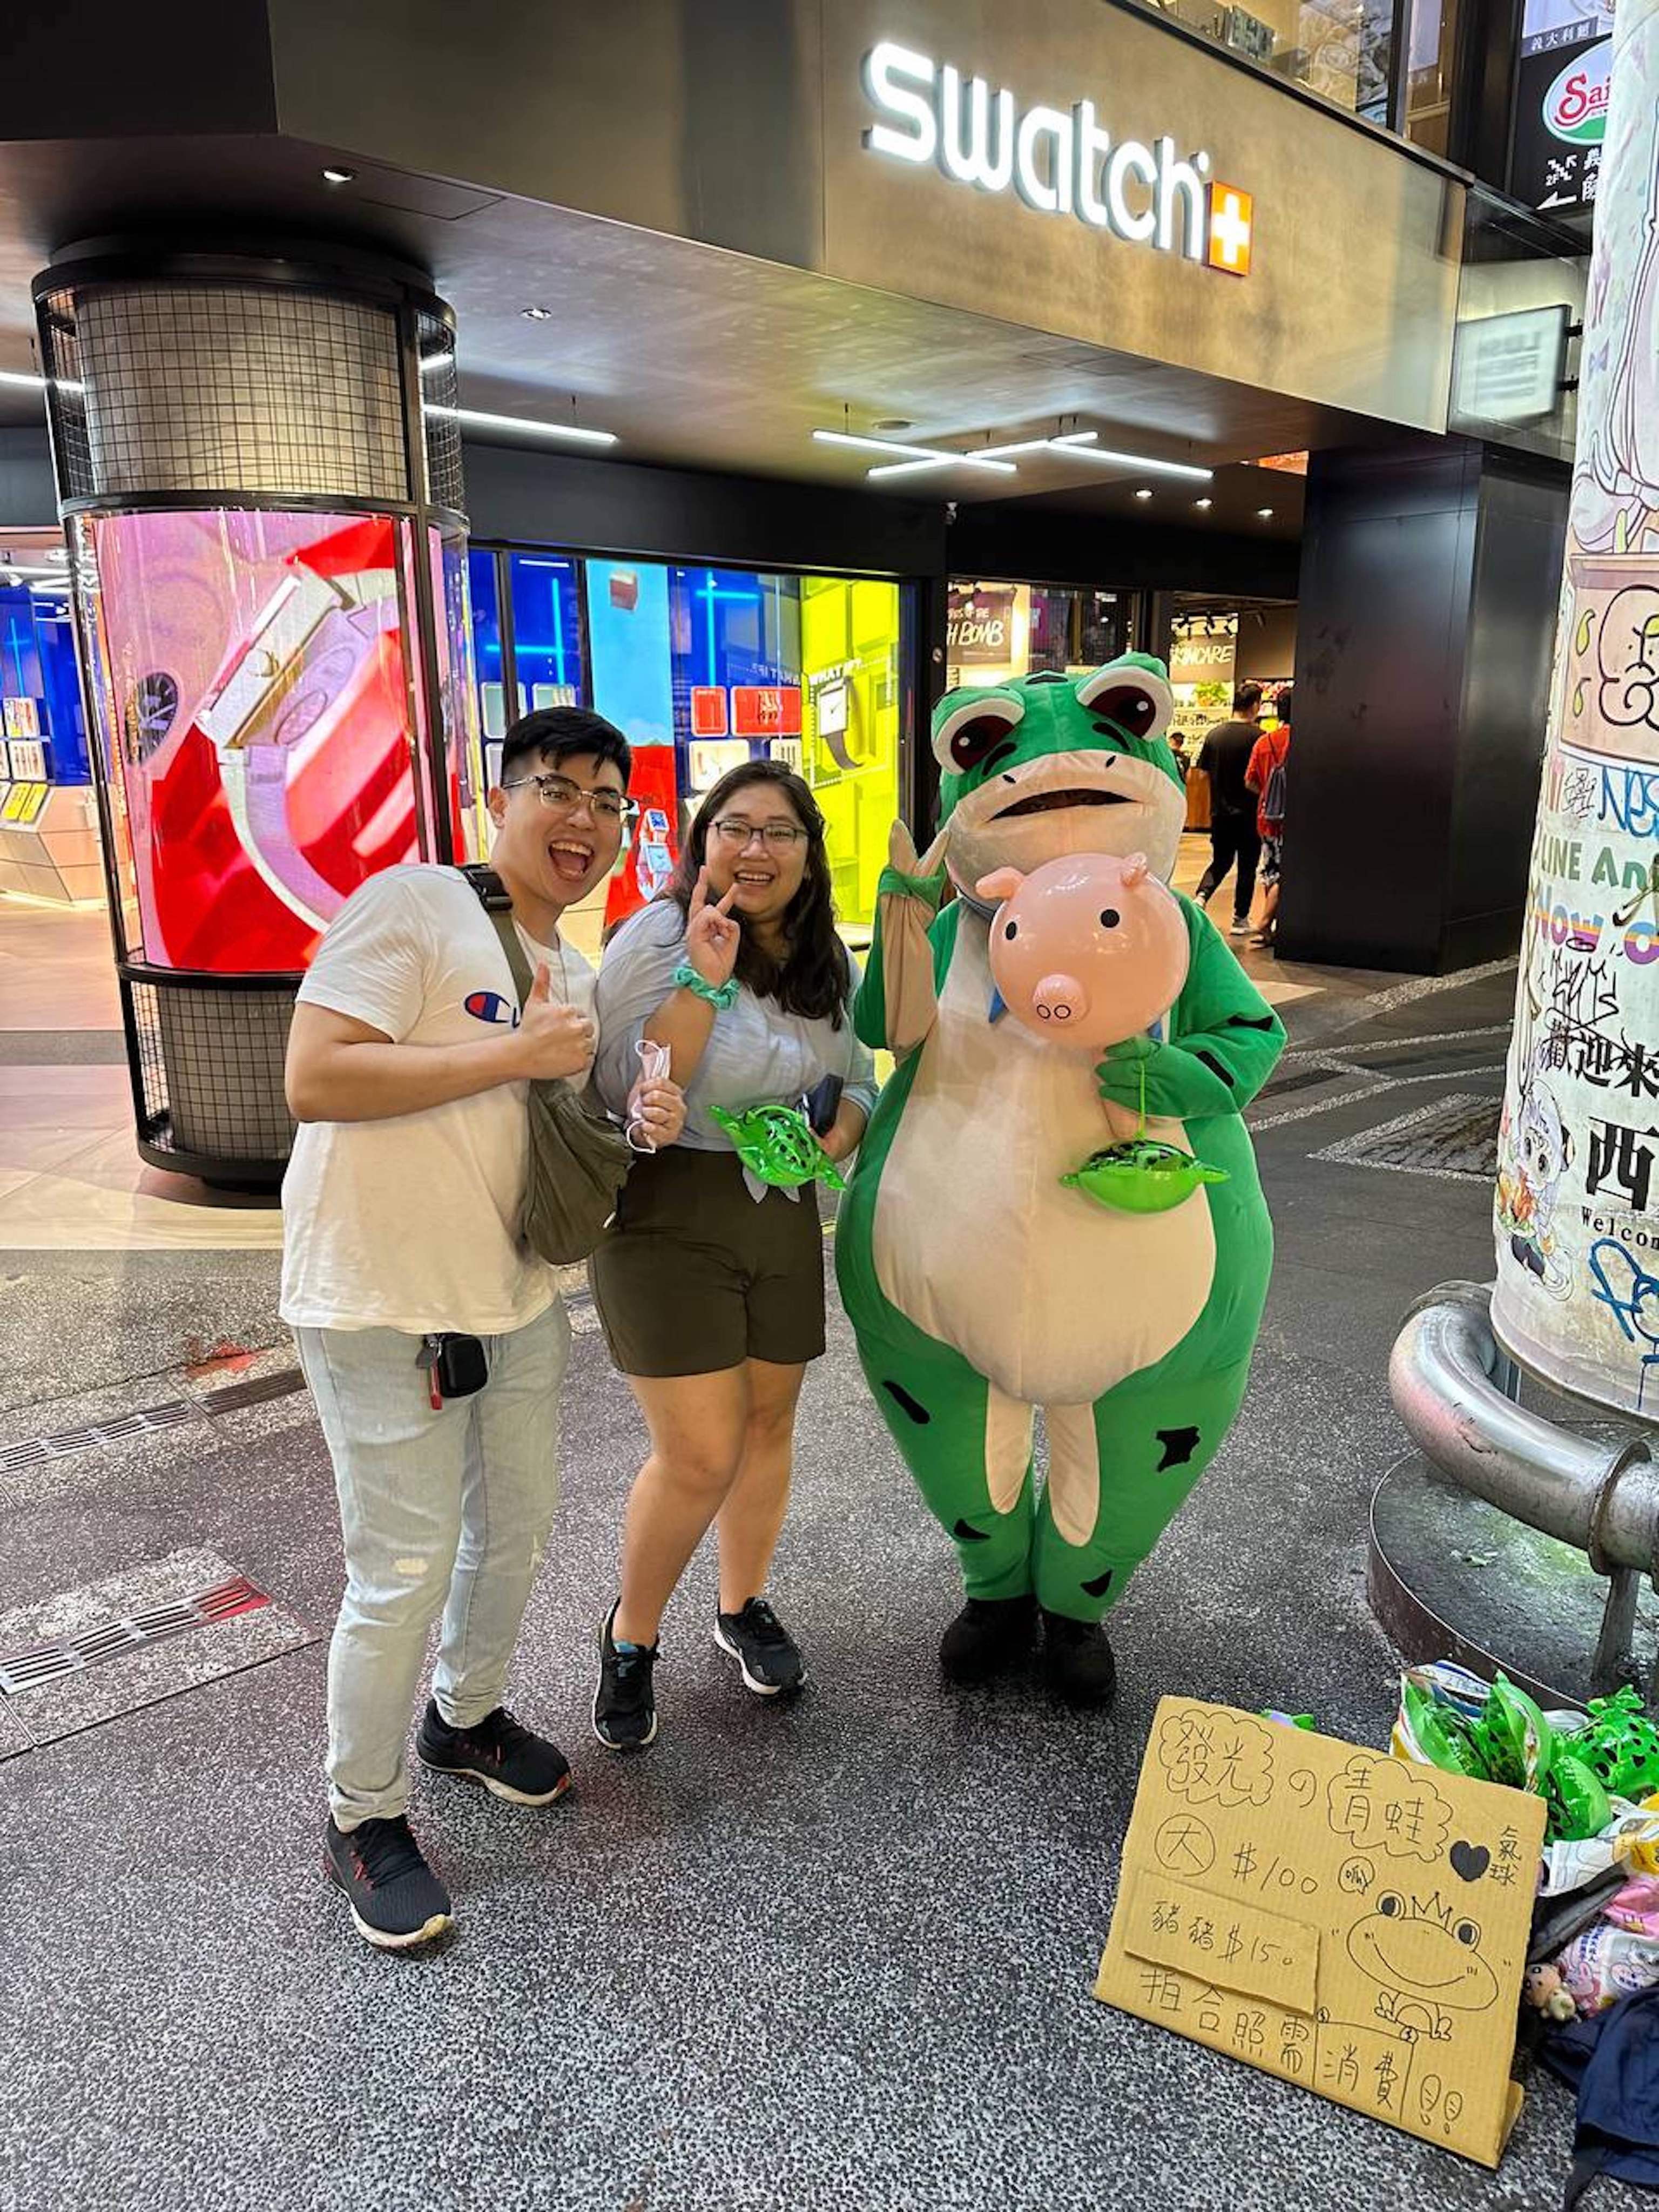 A loved one of someone with depression must safeguard their own mental health, say Singaporean couple Nicholas Sim and Bernadette Loh. She suffers from depression and says his support is a big help. He makes sure to take time out “to process things”. Photo: courtesy of Bernadette Loh